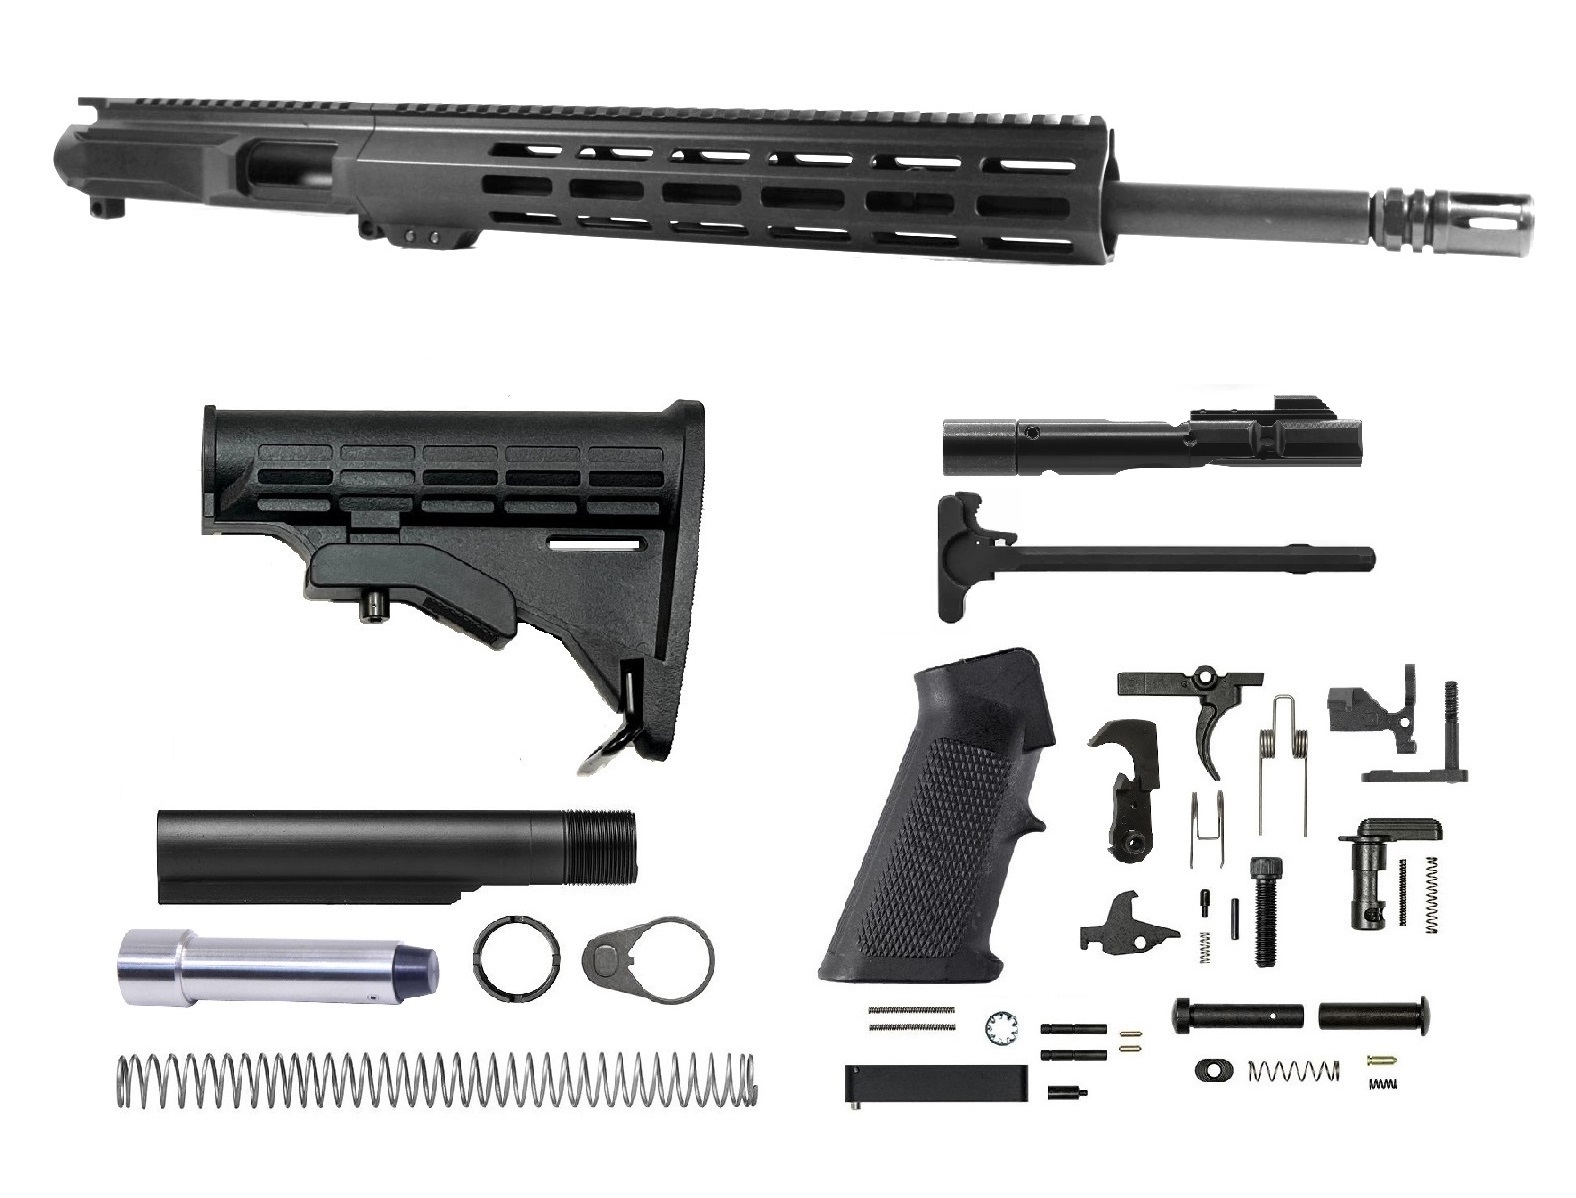 16" 40 S&W PCC AR Upper Kit | Made in the USA